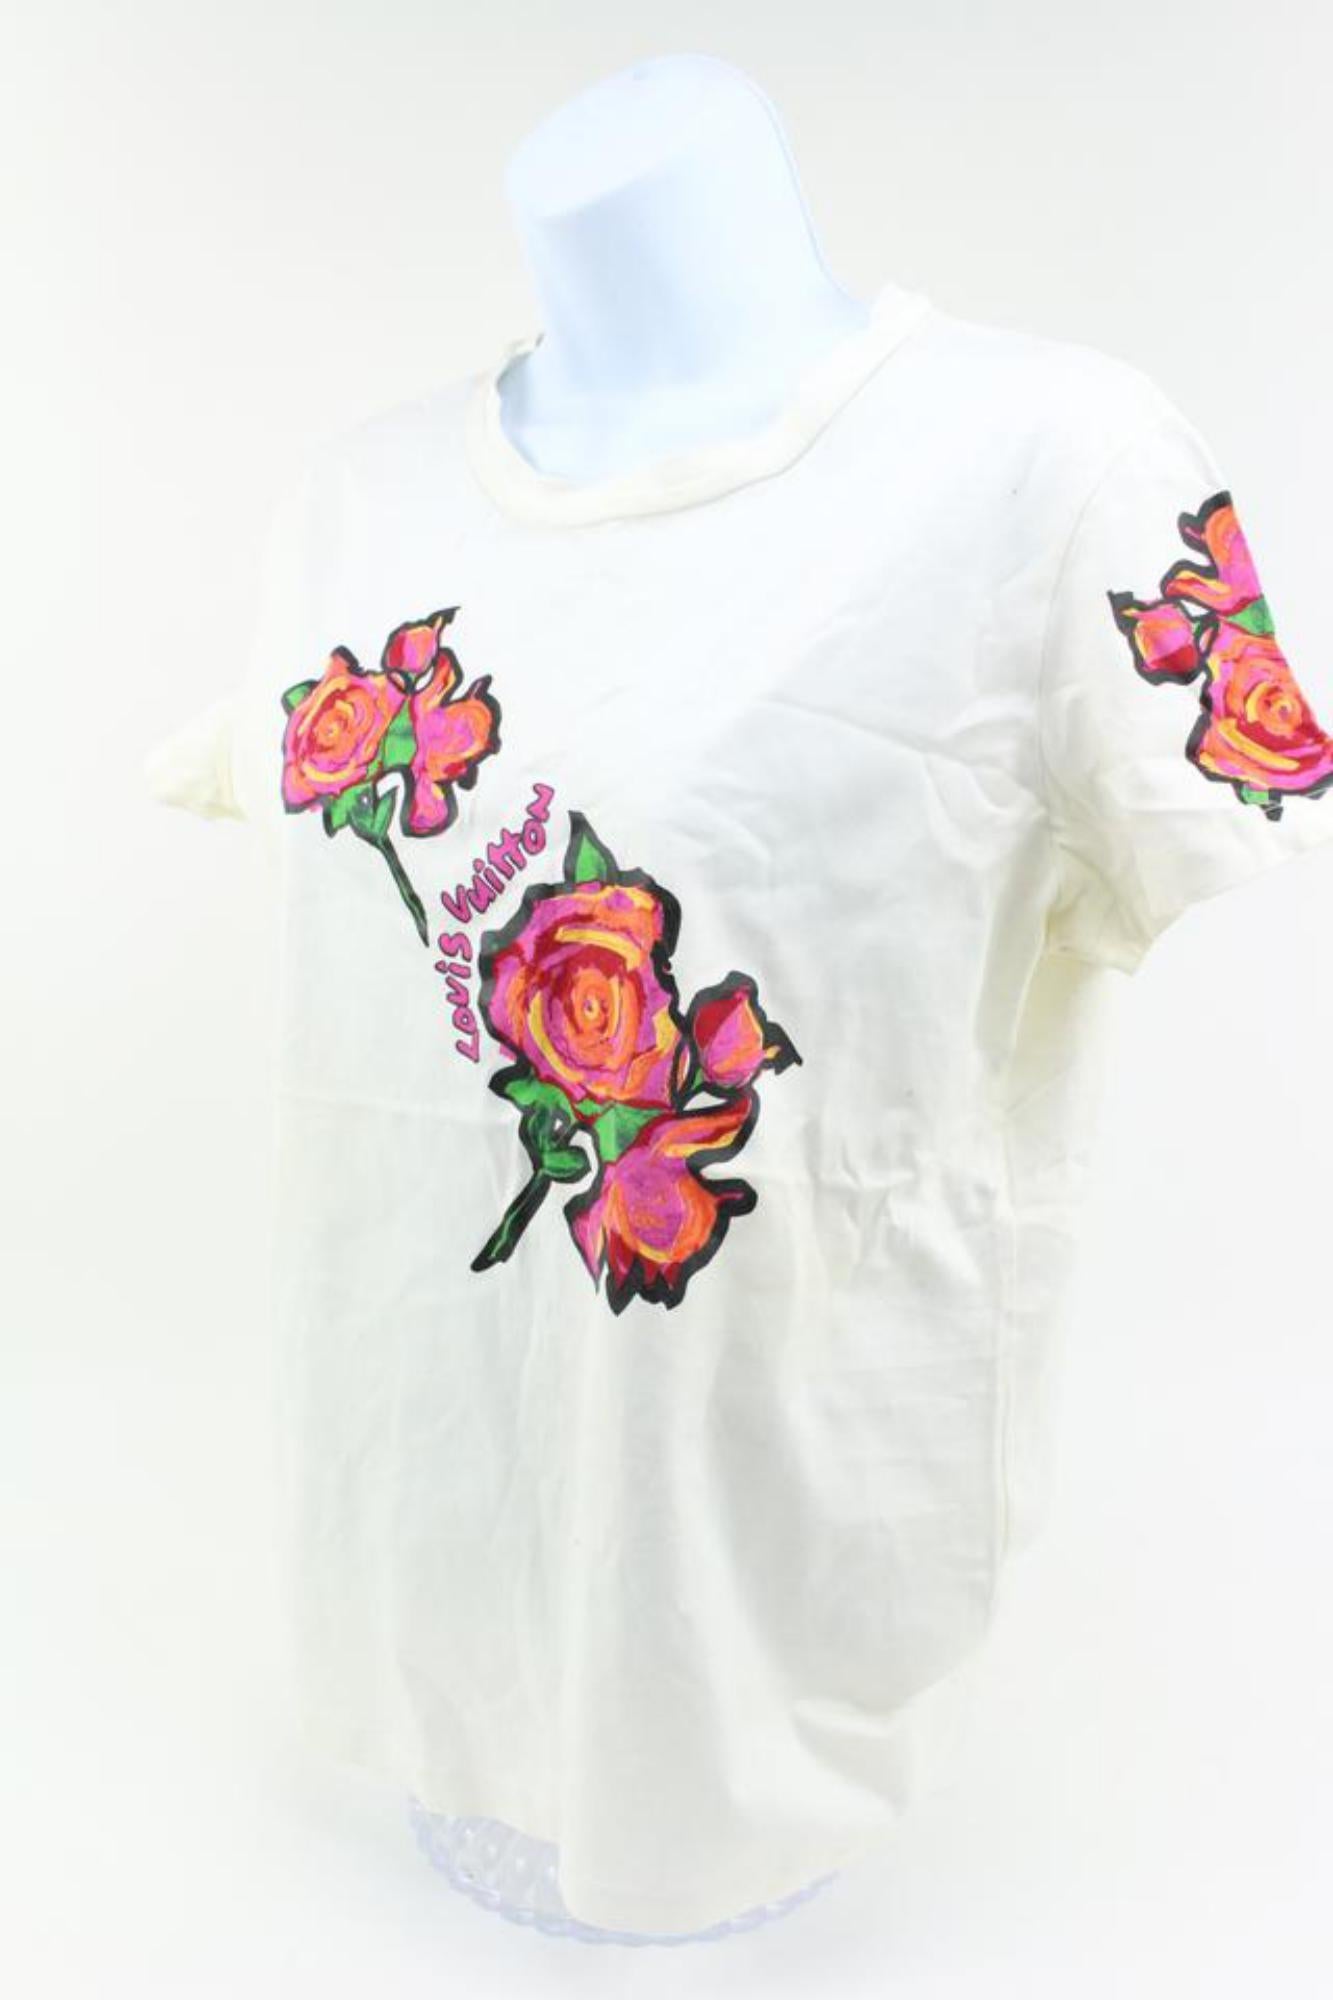 Louis Vuitton Ultra Rare Women's Small Runway Stephen Sprouse Roses T-Shirt 11lv34s
Made In: Italy
Measurements: Length:  19